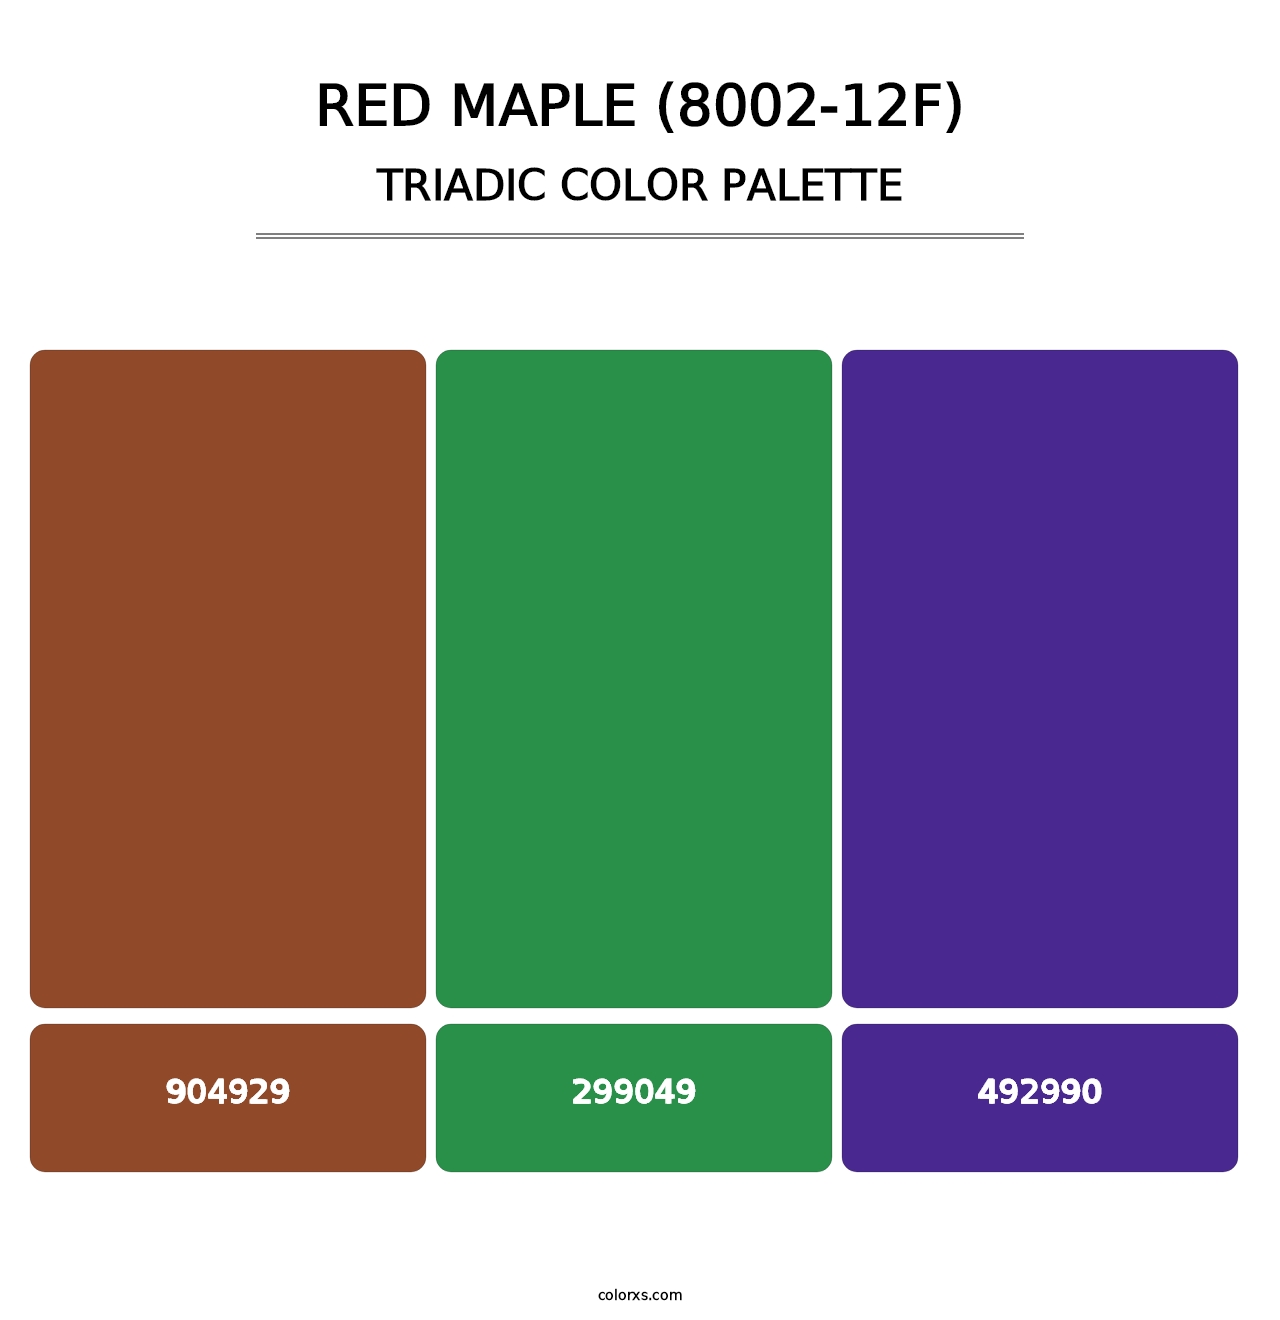 Red Maple (8002-12F) - Triadic Color Palette